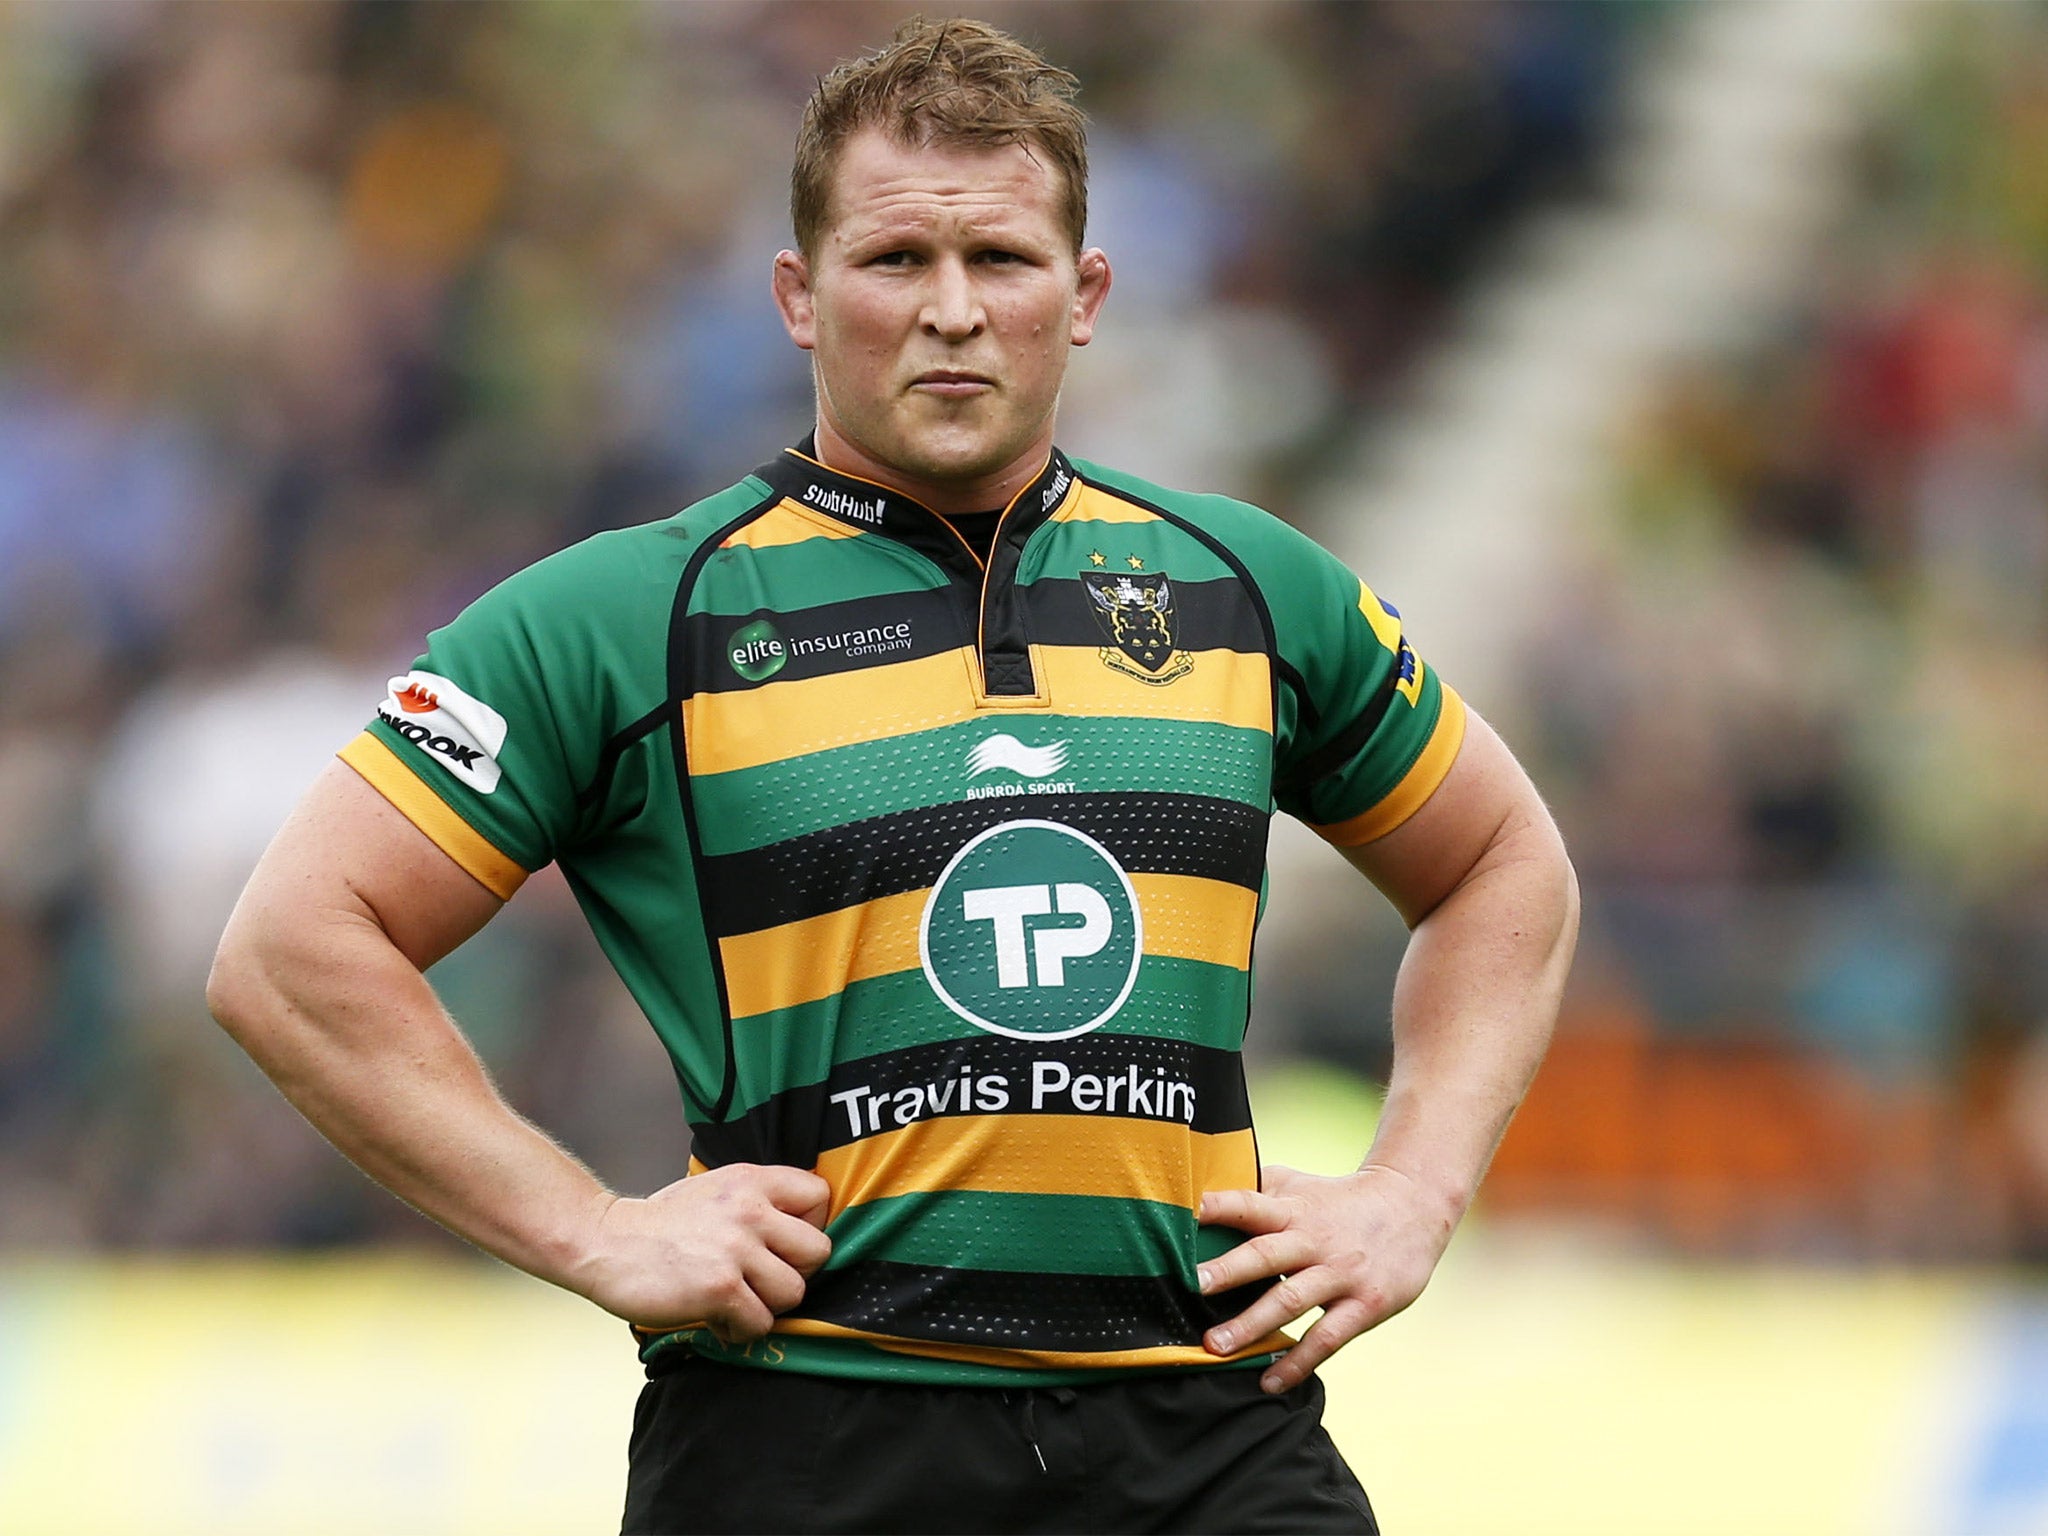 Dylan Hartley has been banned for biting, gouging and elbowing opponents during his career